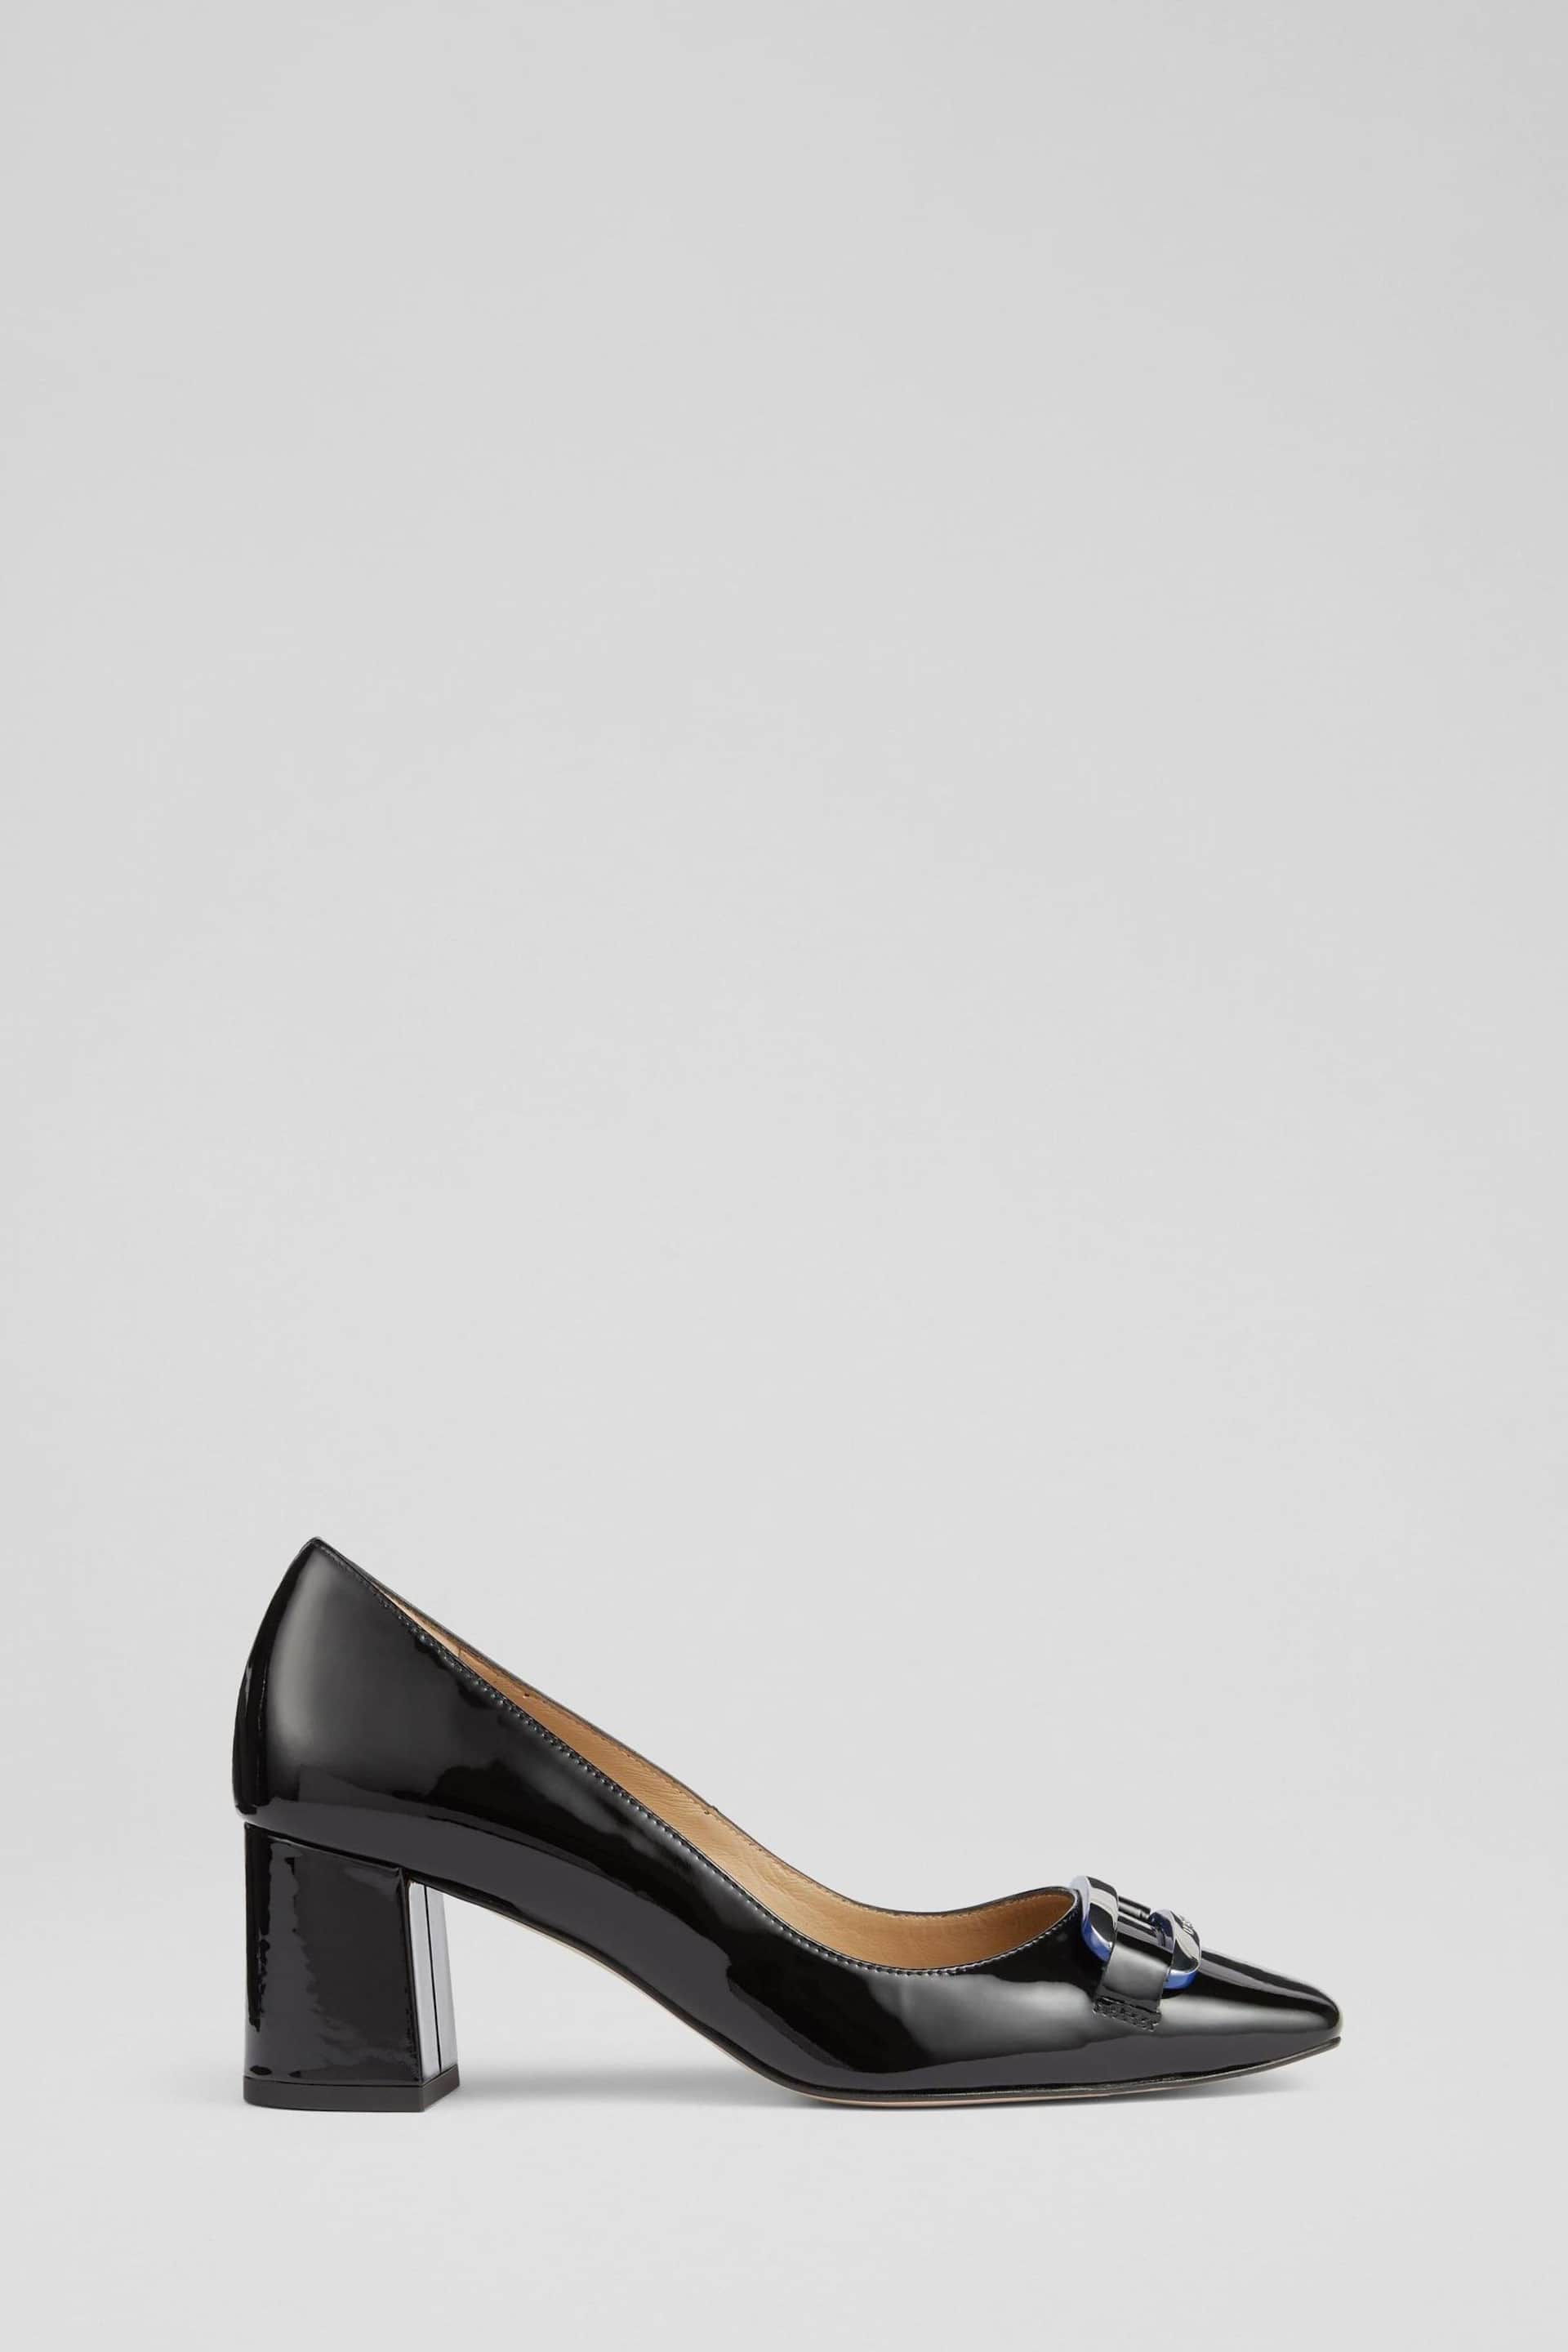 LK Bennett Leather Court Shoes - Image 1 of 4